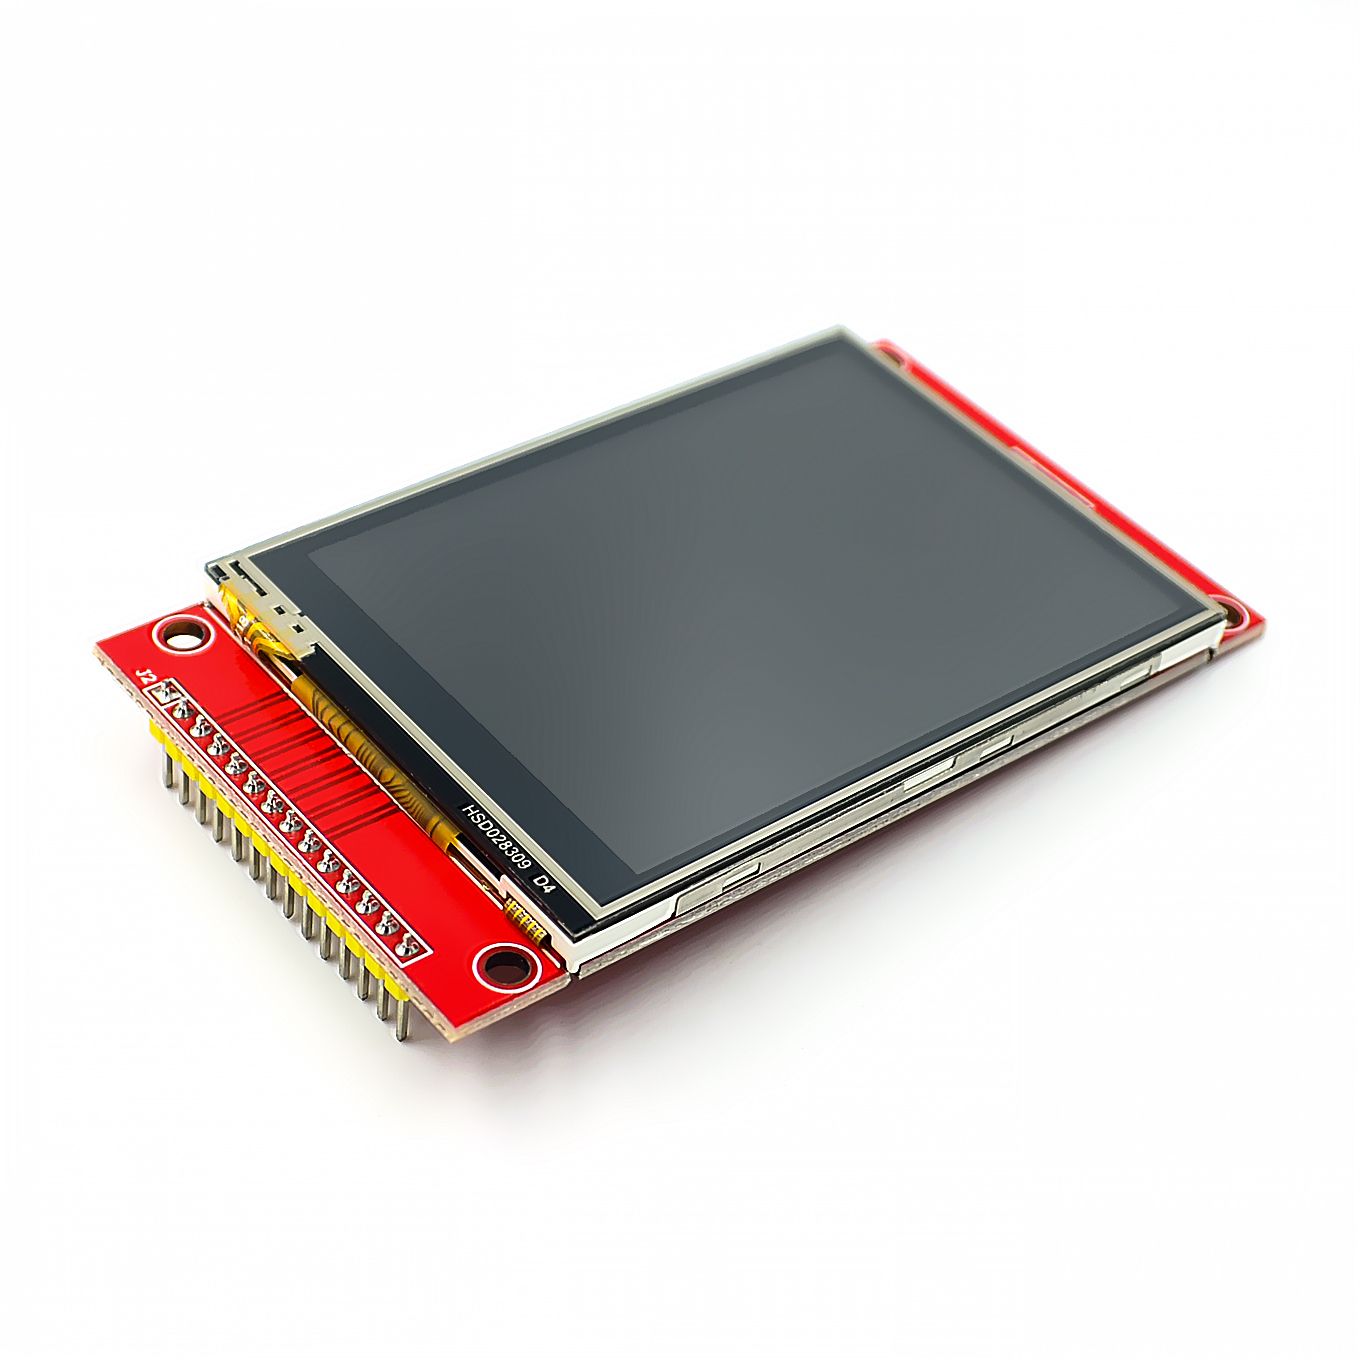 Arduino 2.8" TFT SPI Touch Shield for Arduino 